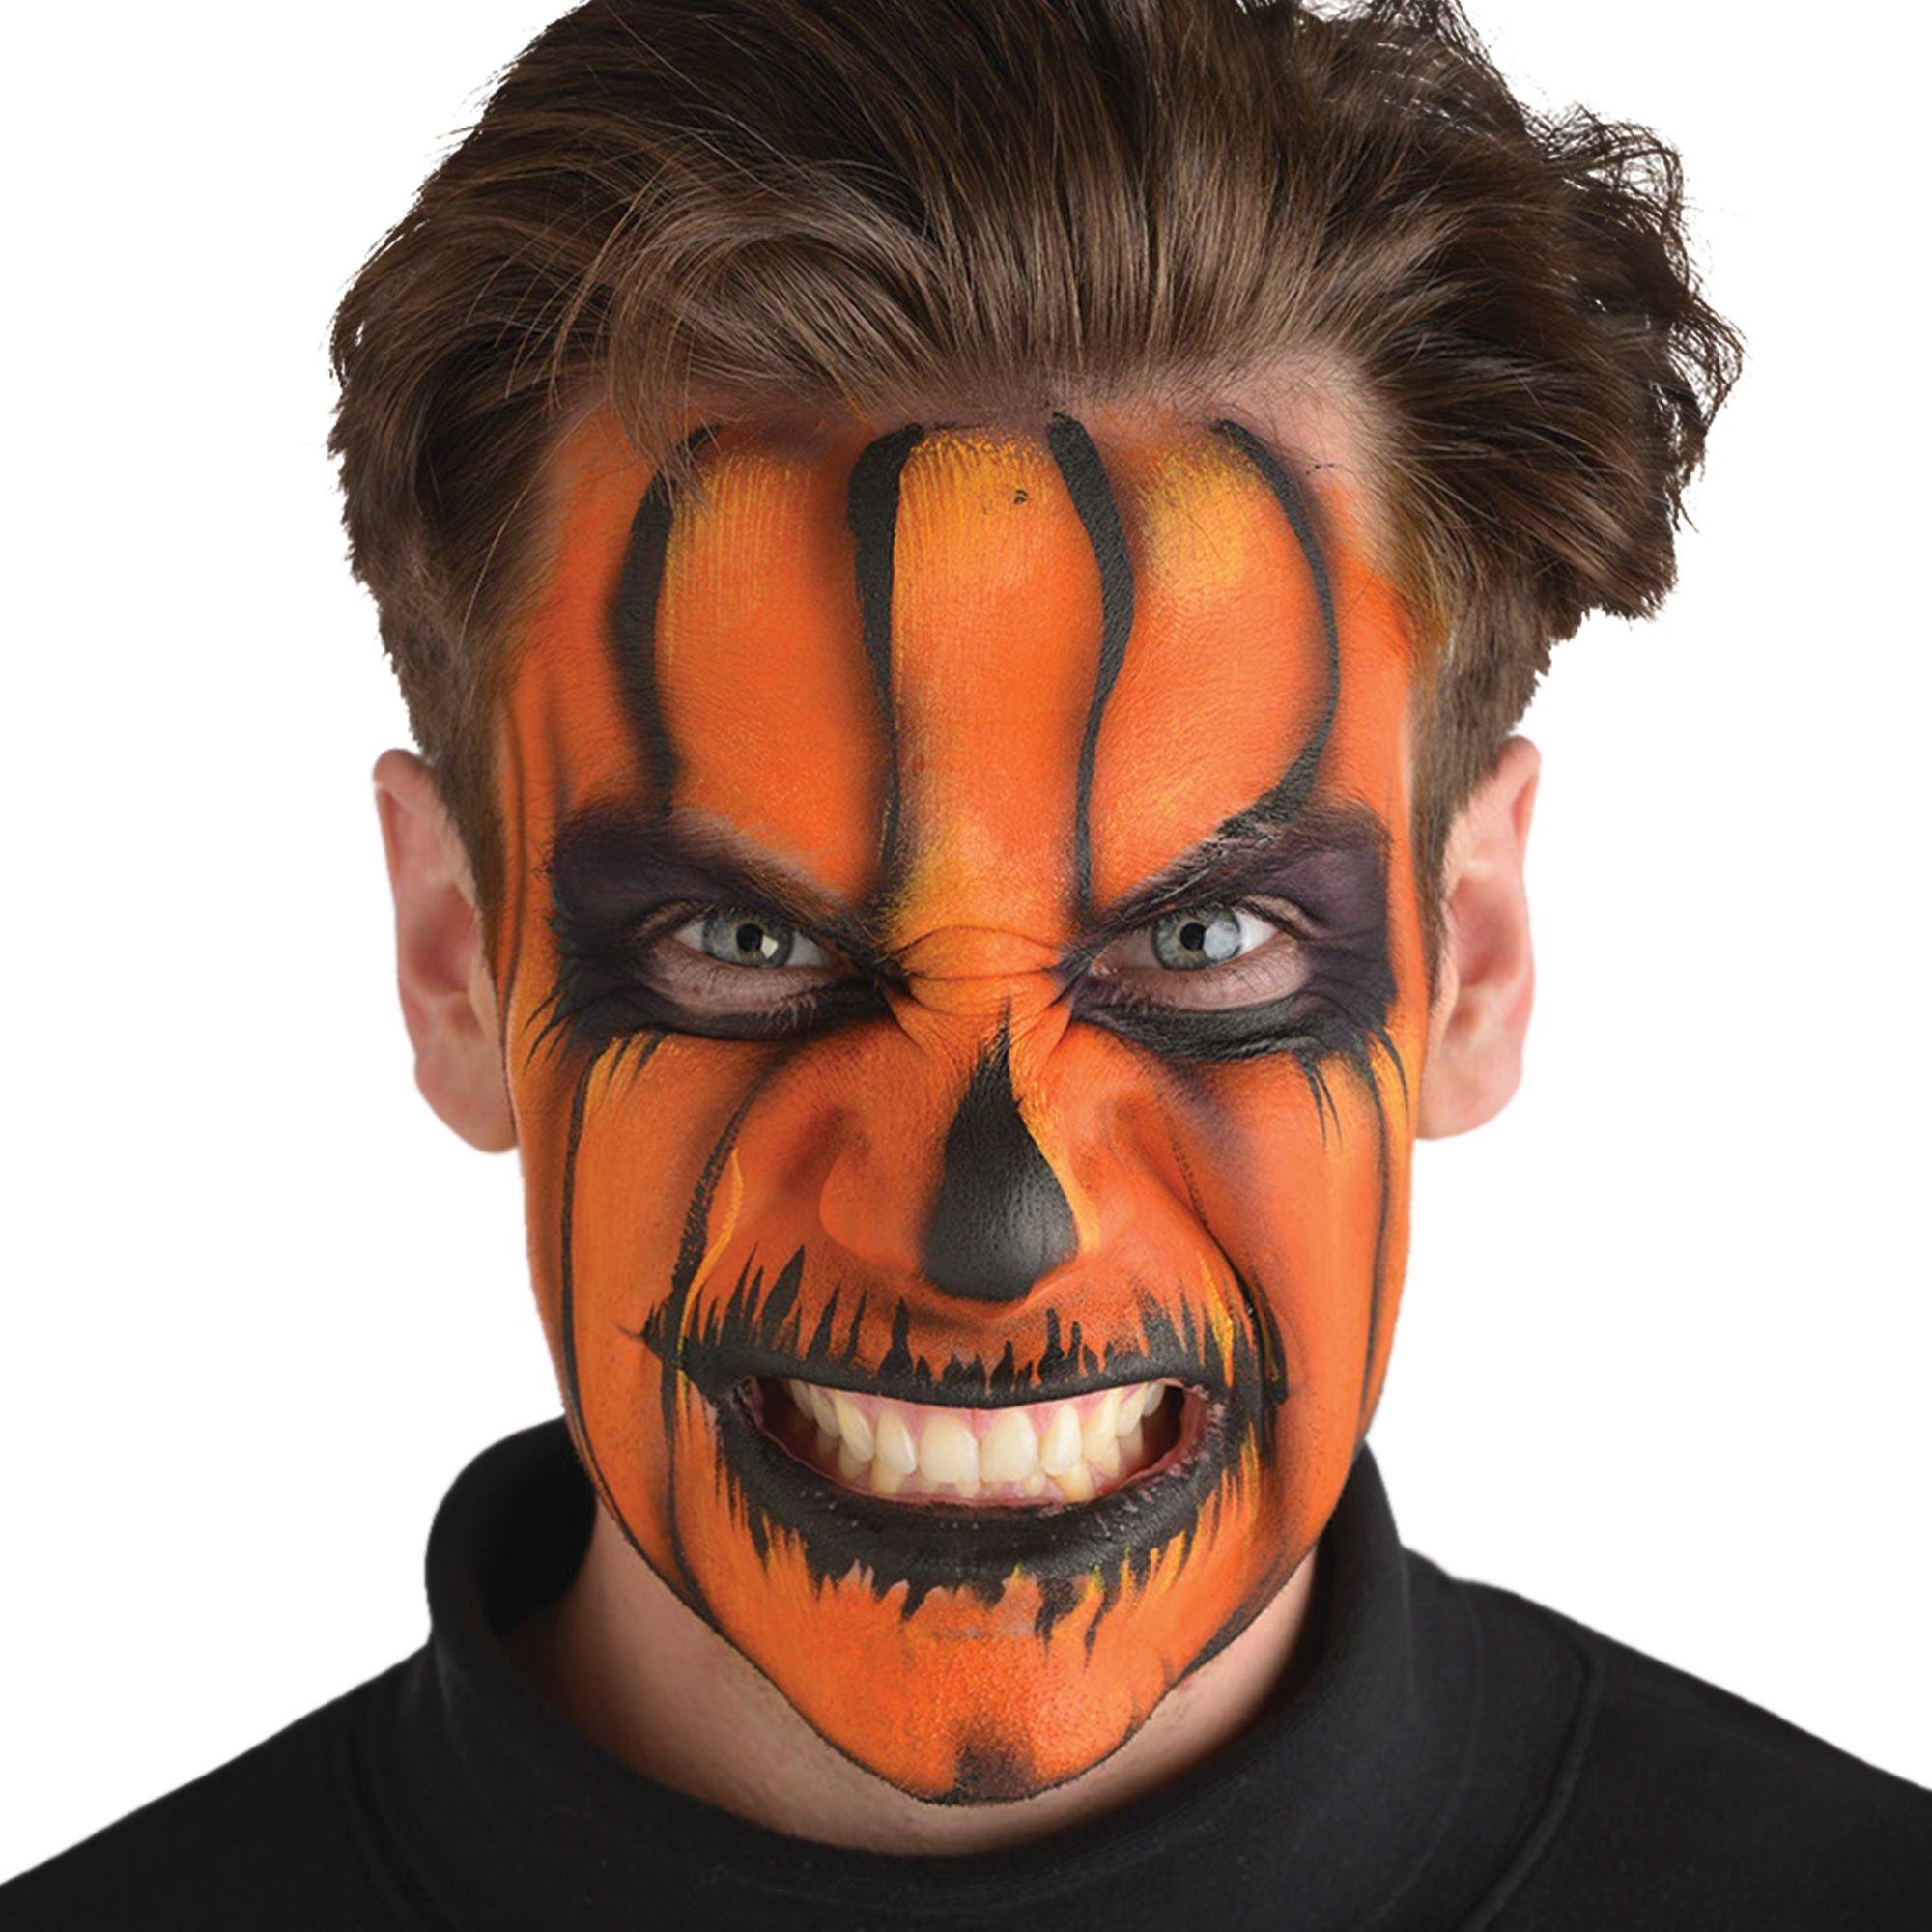 All-In-One Halloween Makeup Kit 18pc | Party City